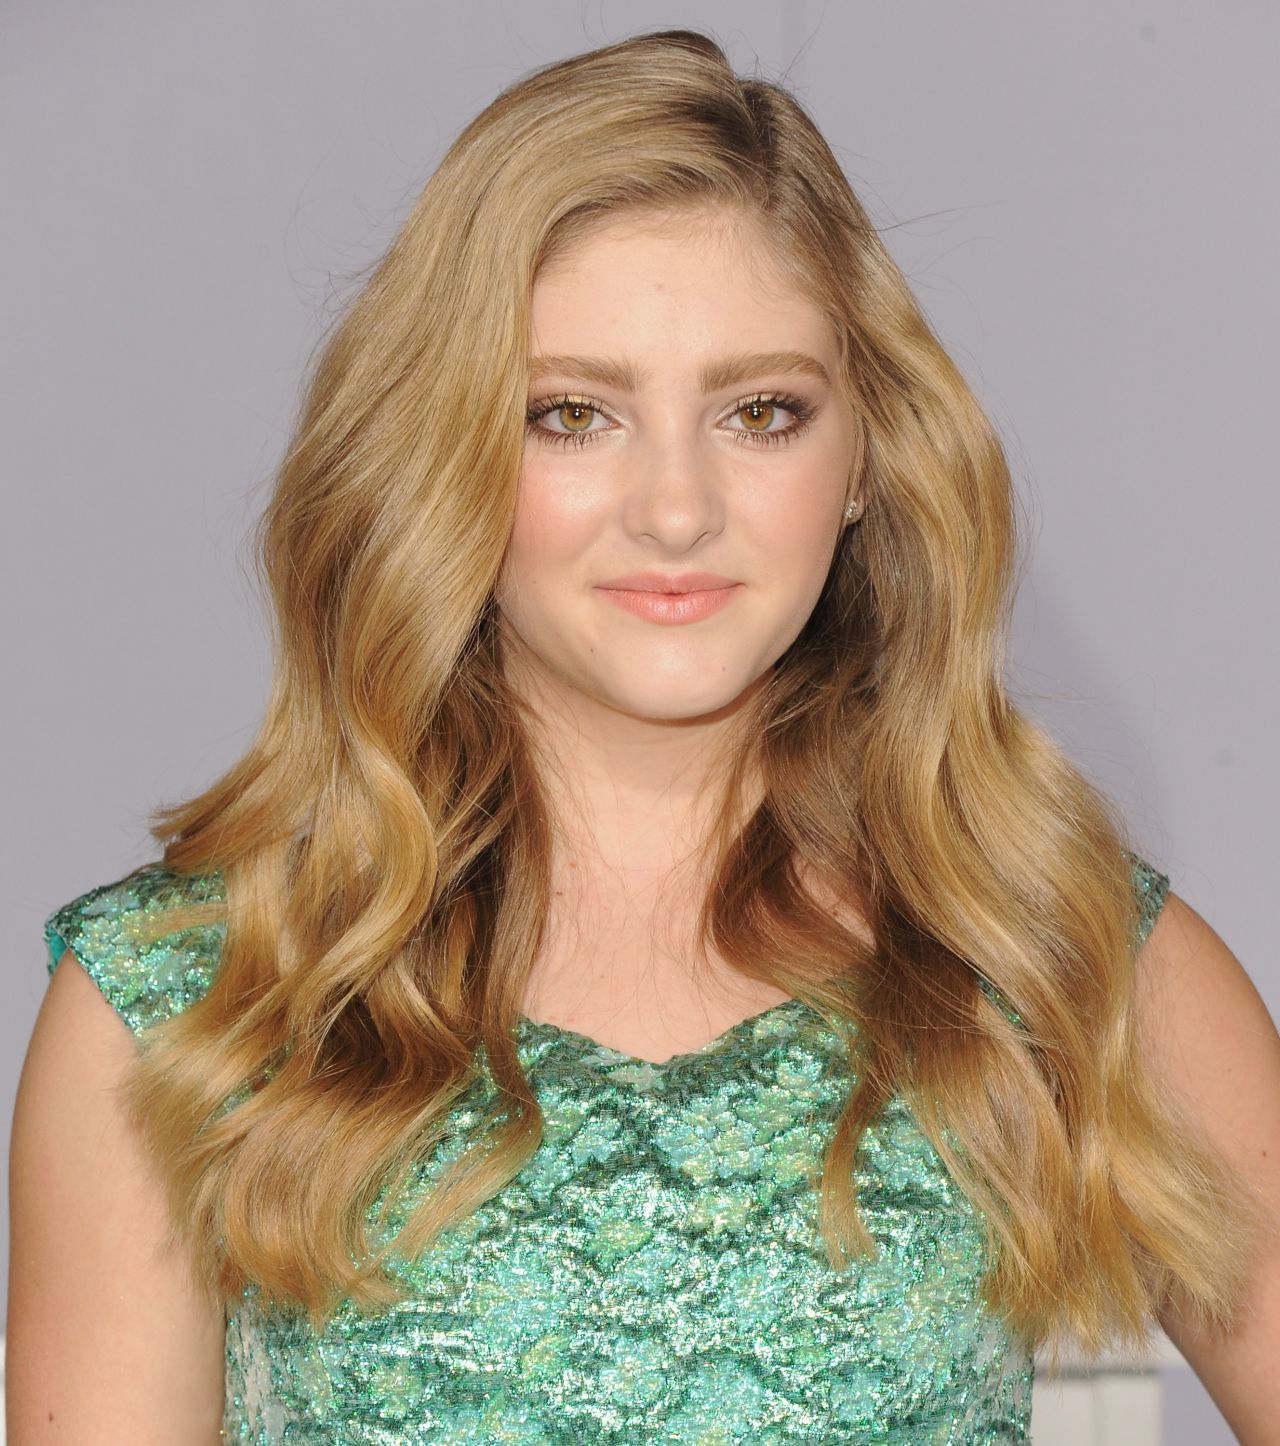 The young performer Willow Shields is best known as Primrose Everdeen in the "Hunger Games" movies. At 14, she's the youngest contestant the show has ever had.